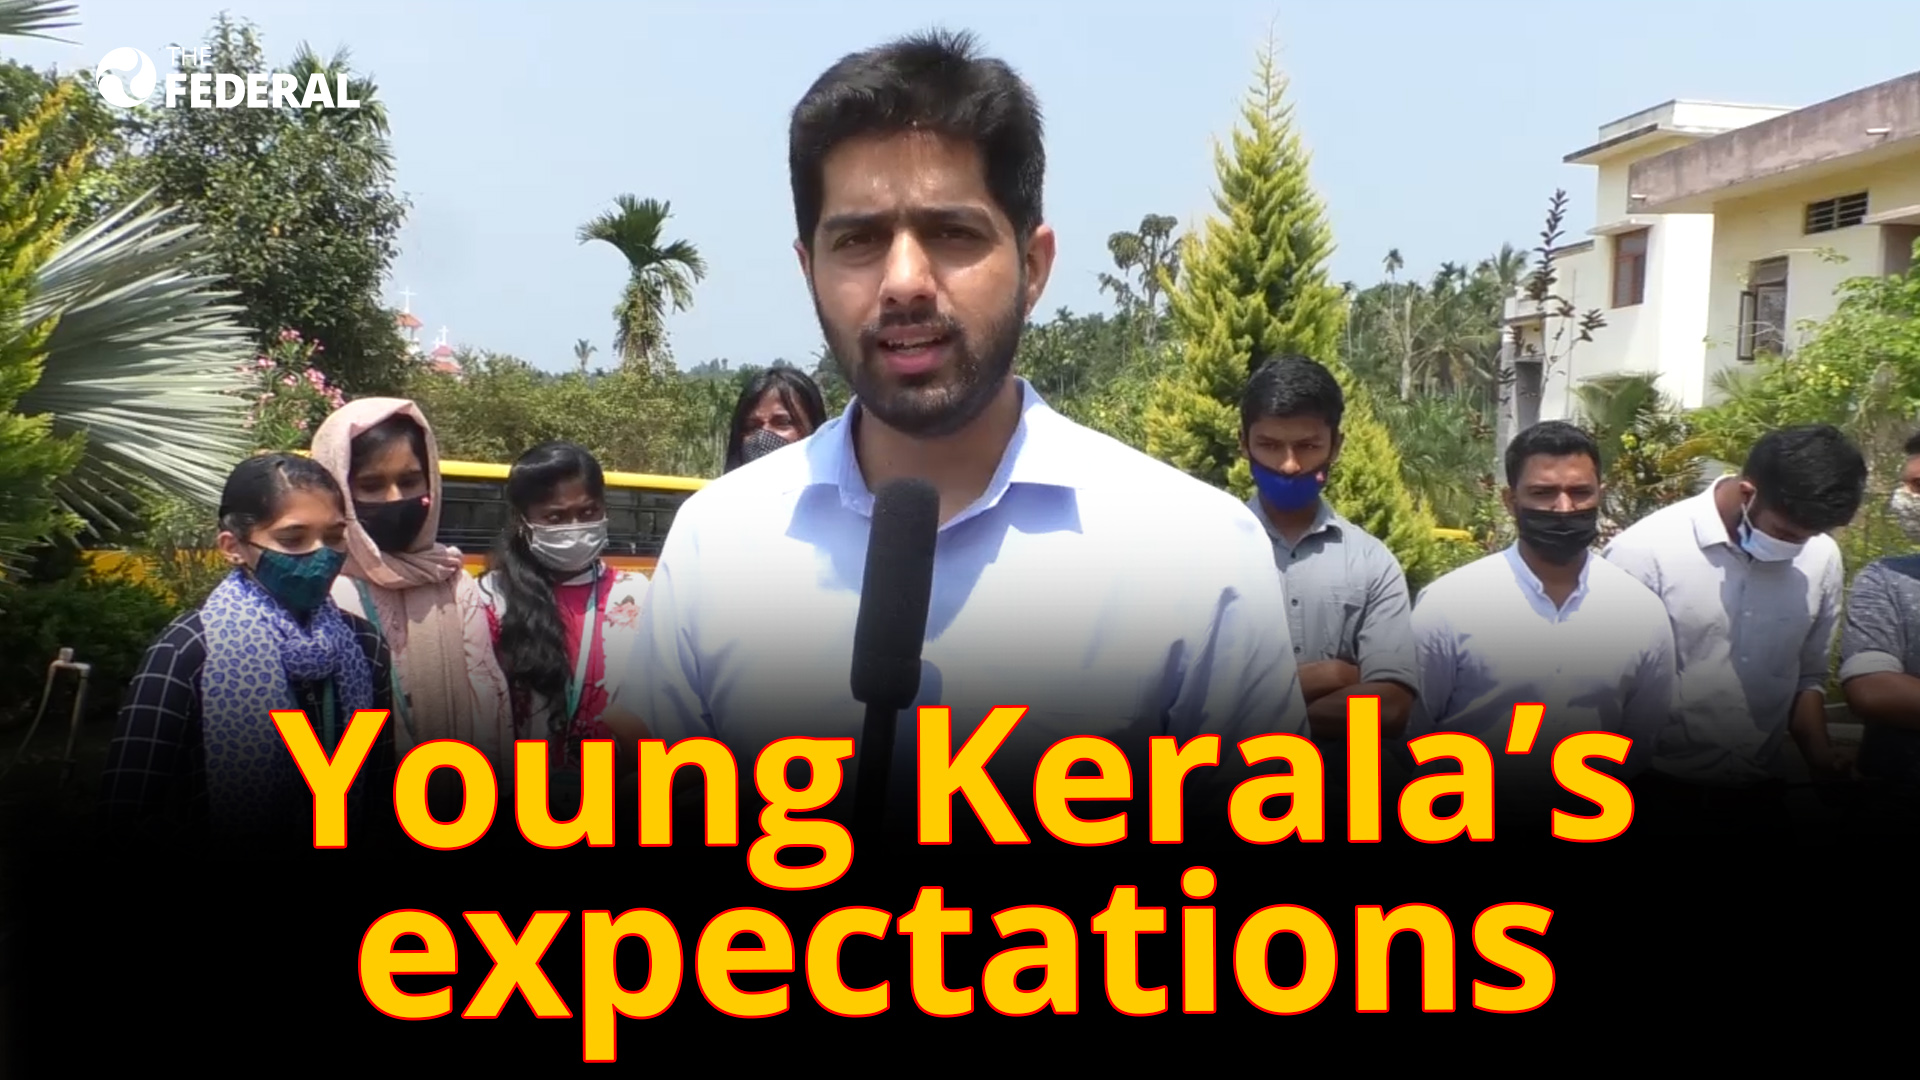 Voice of young Keralites, on elections and aspirations